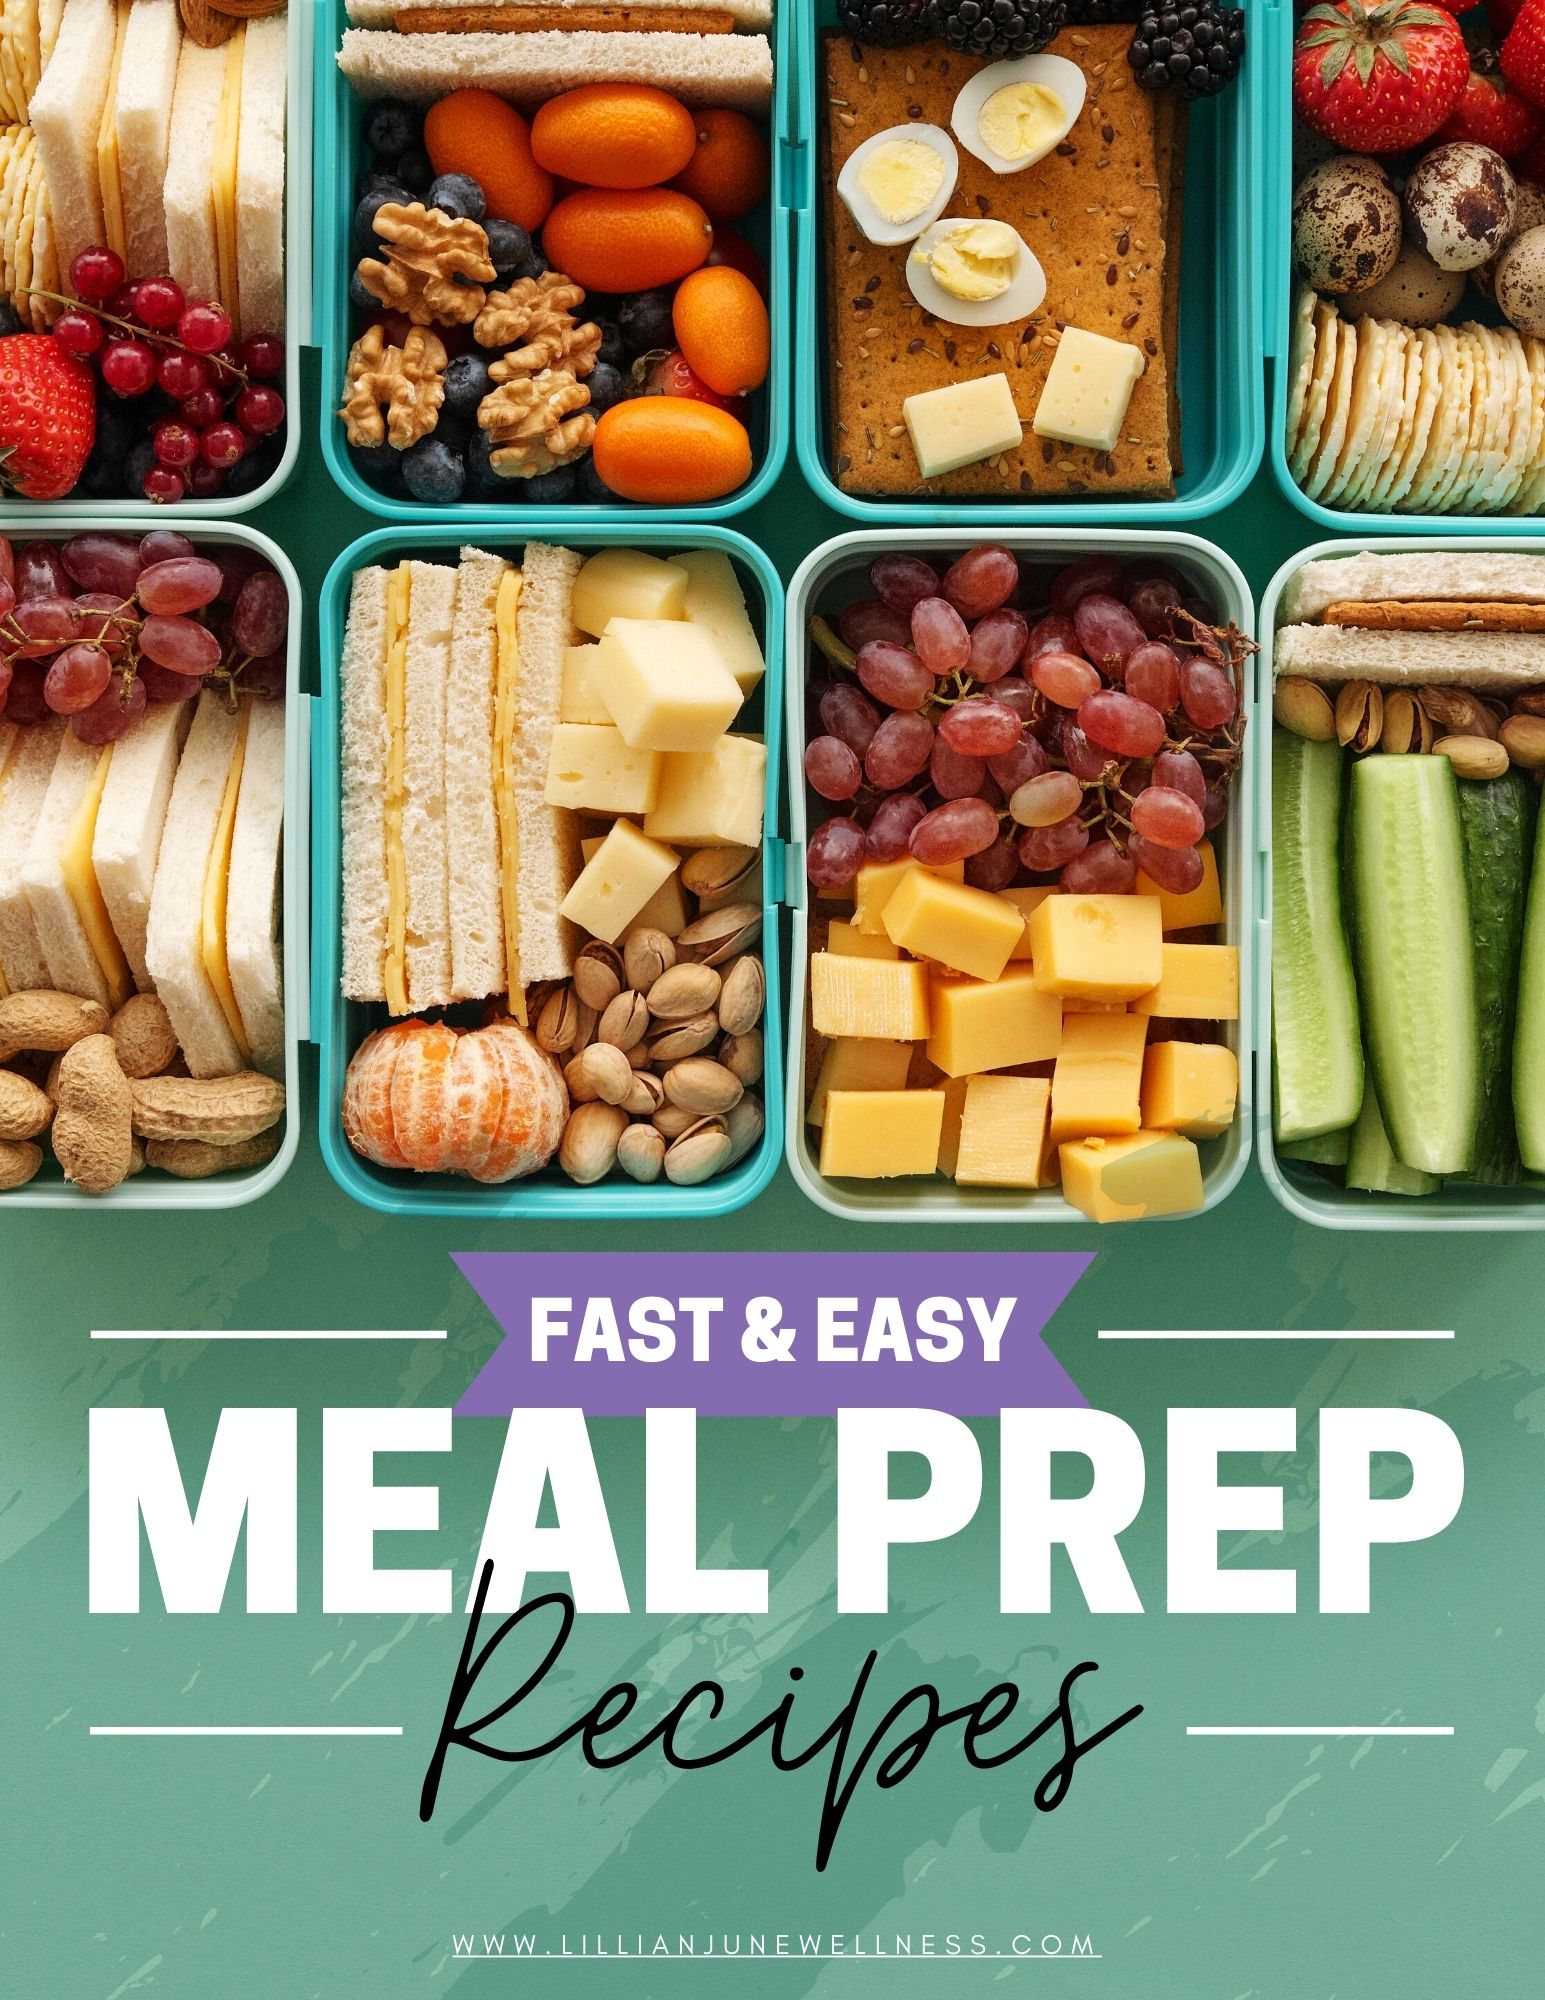 Meal prep recipe guide with image of prepared food.